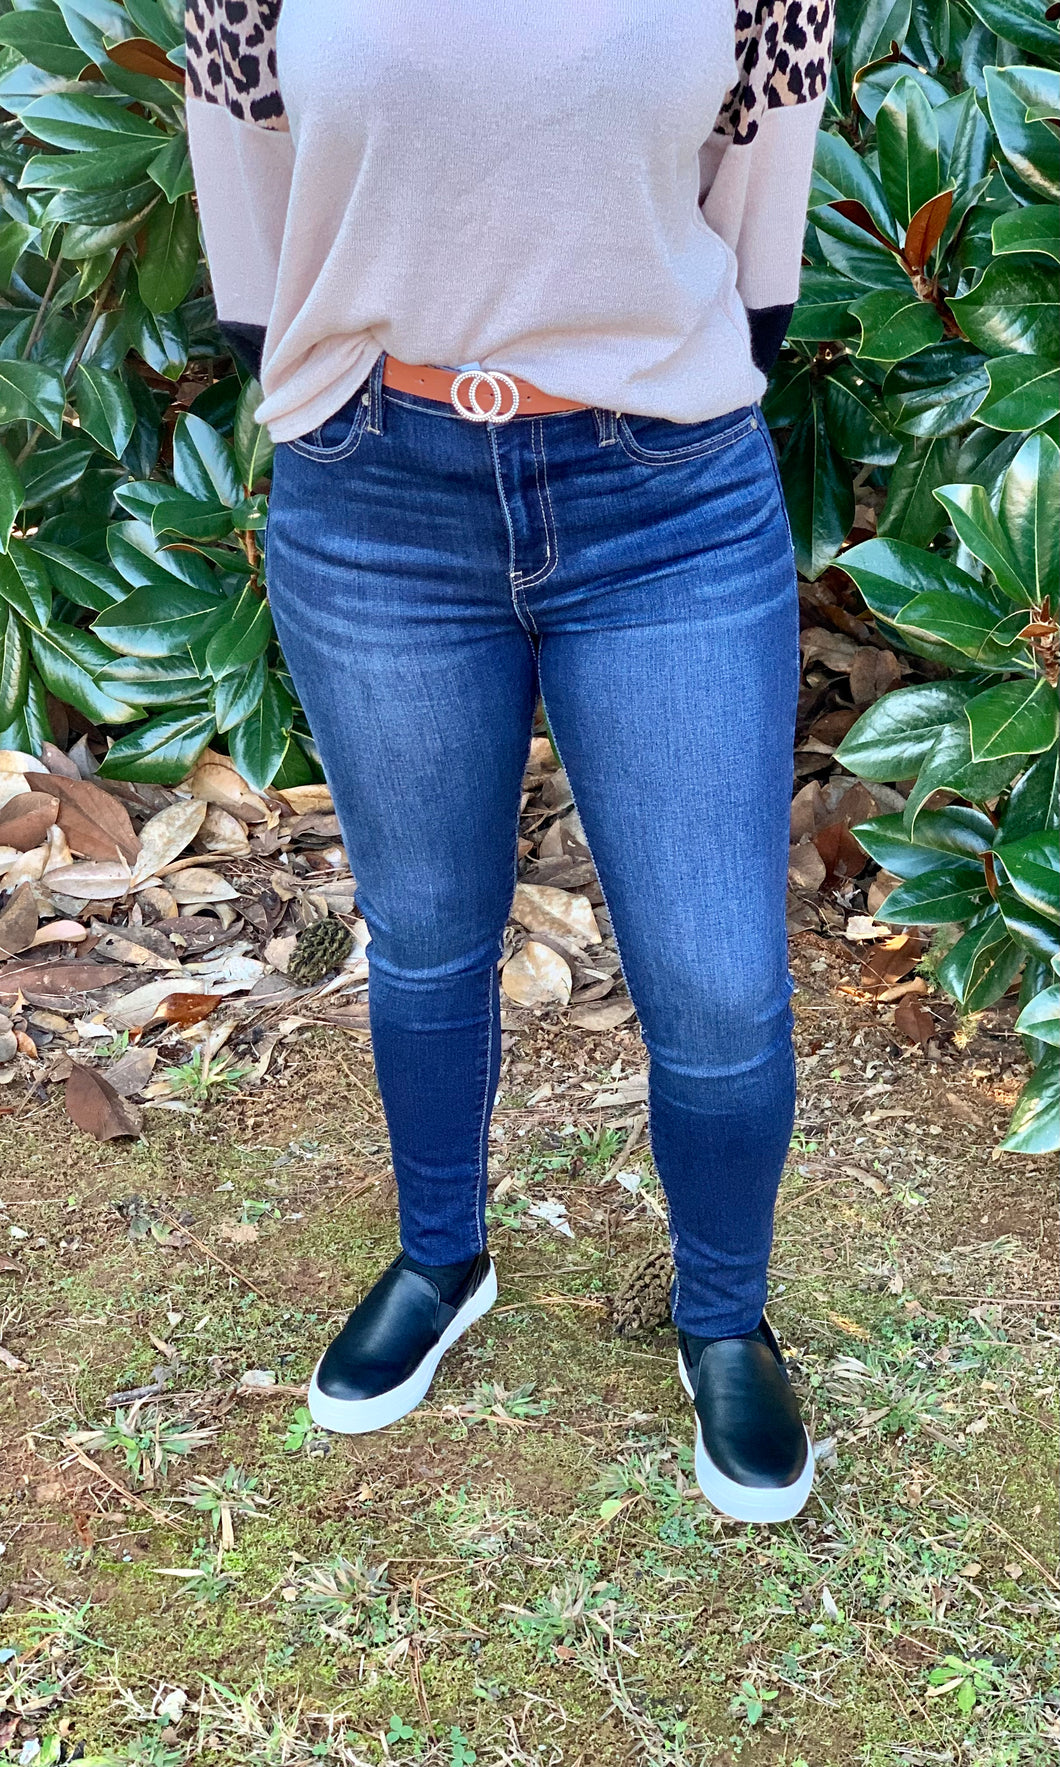 These jeans are a must have in your closet! Our Let It Go Jean is the perfect basic dark wash jean that every girl needs. She is a high rise super skinny fit with no distressing. Scoop her up today!